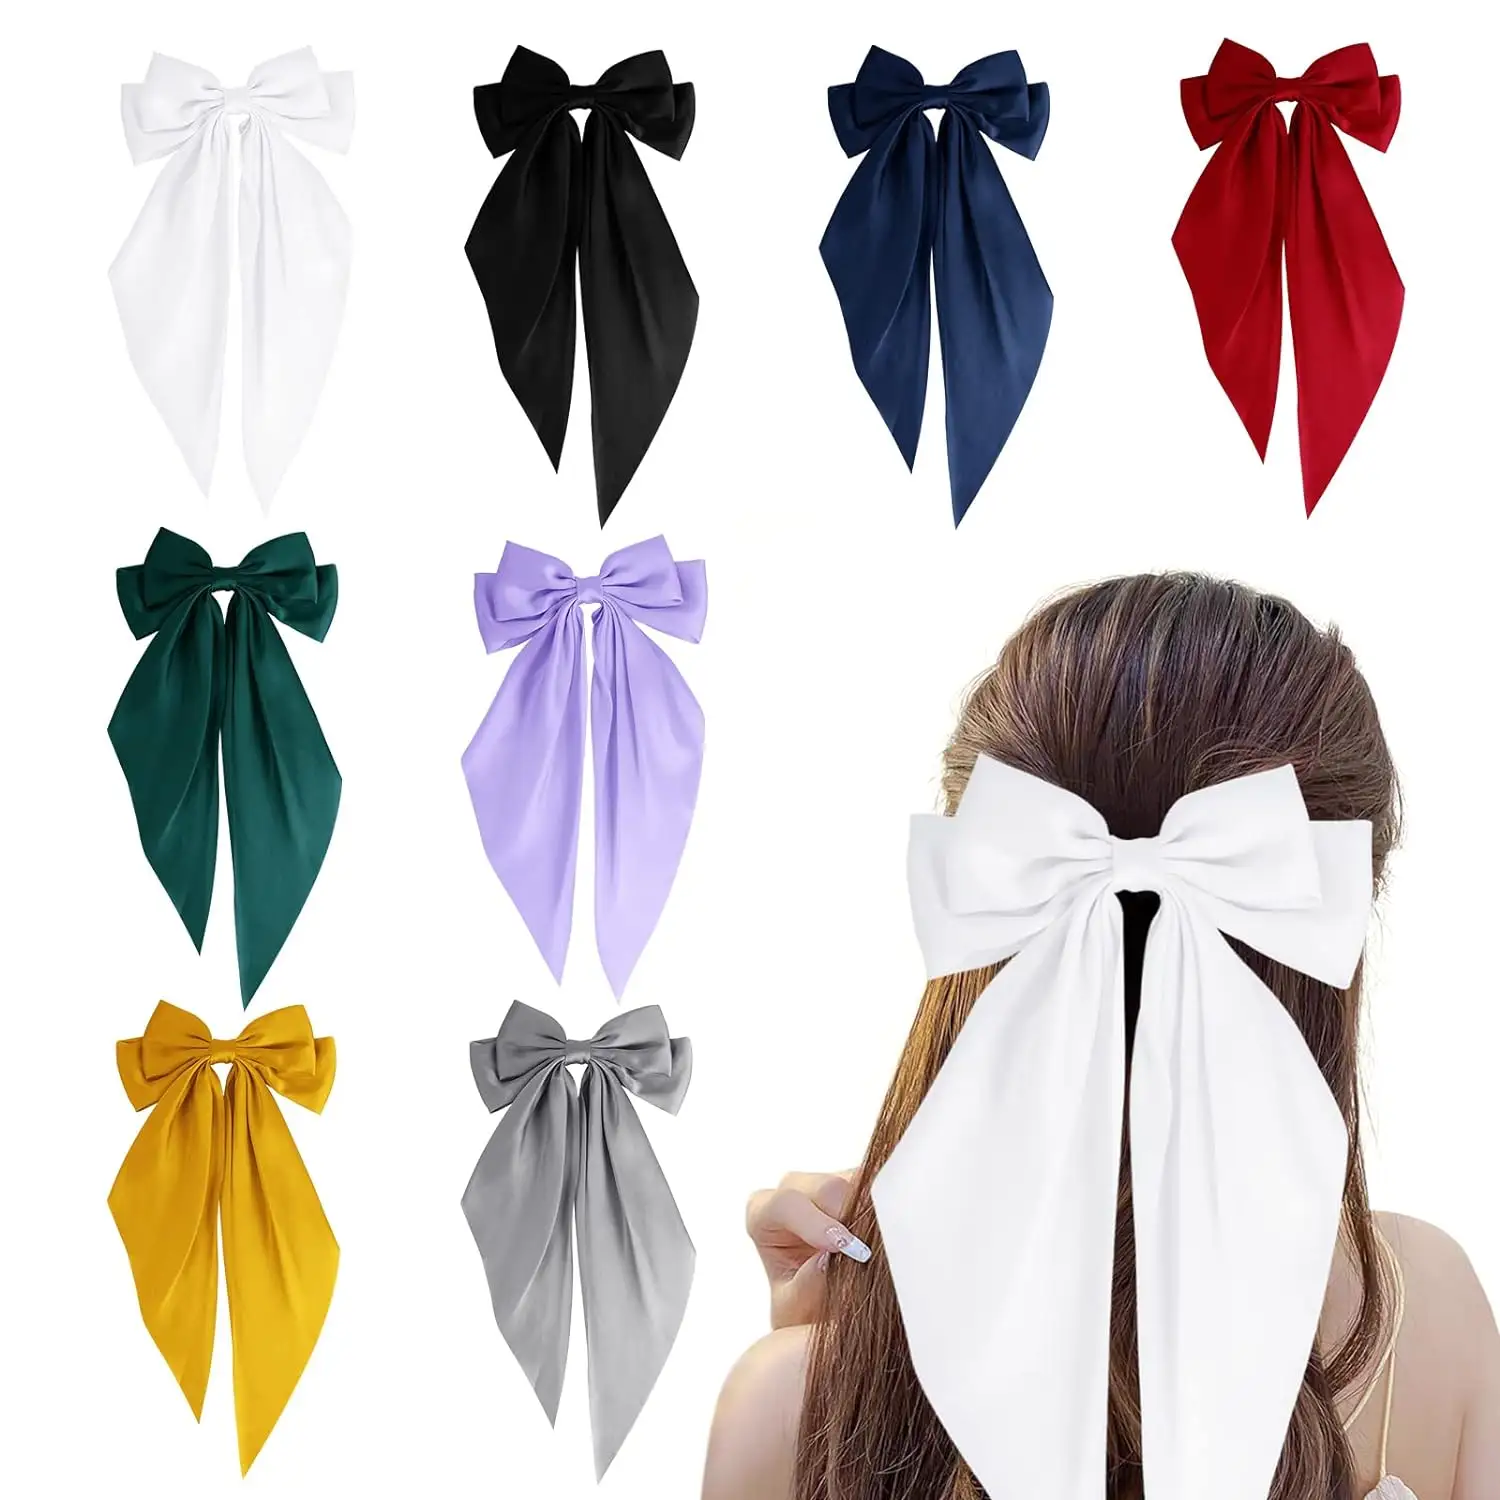 Big Bow Hair Clips Solid Color Bowknot Hairpin French Barrette with Long Silky Satin for Adult Teens Women Hair Accessories